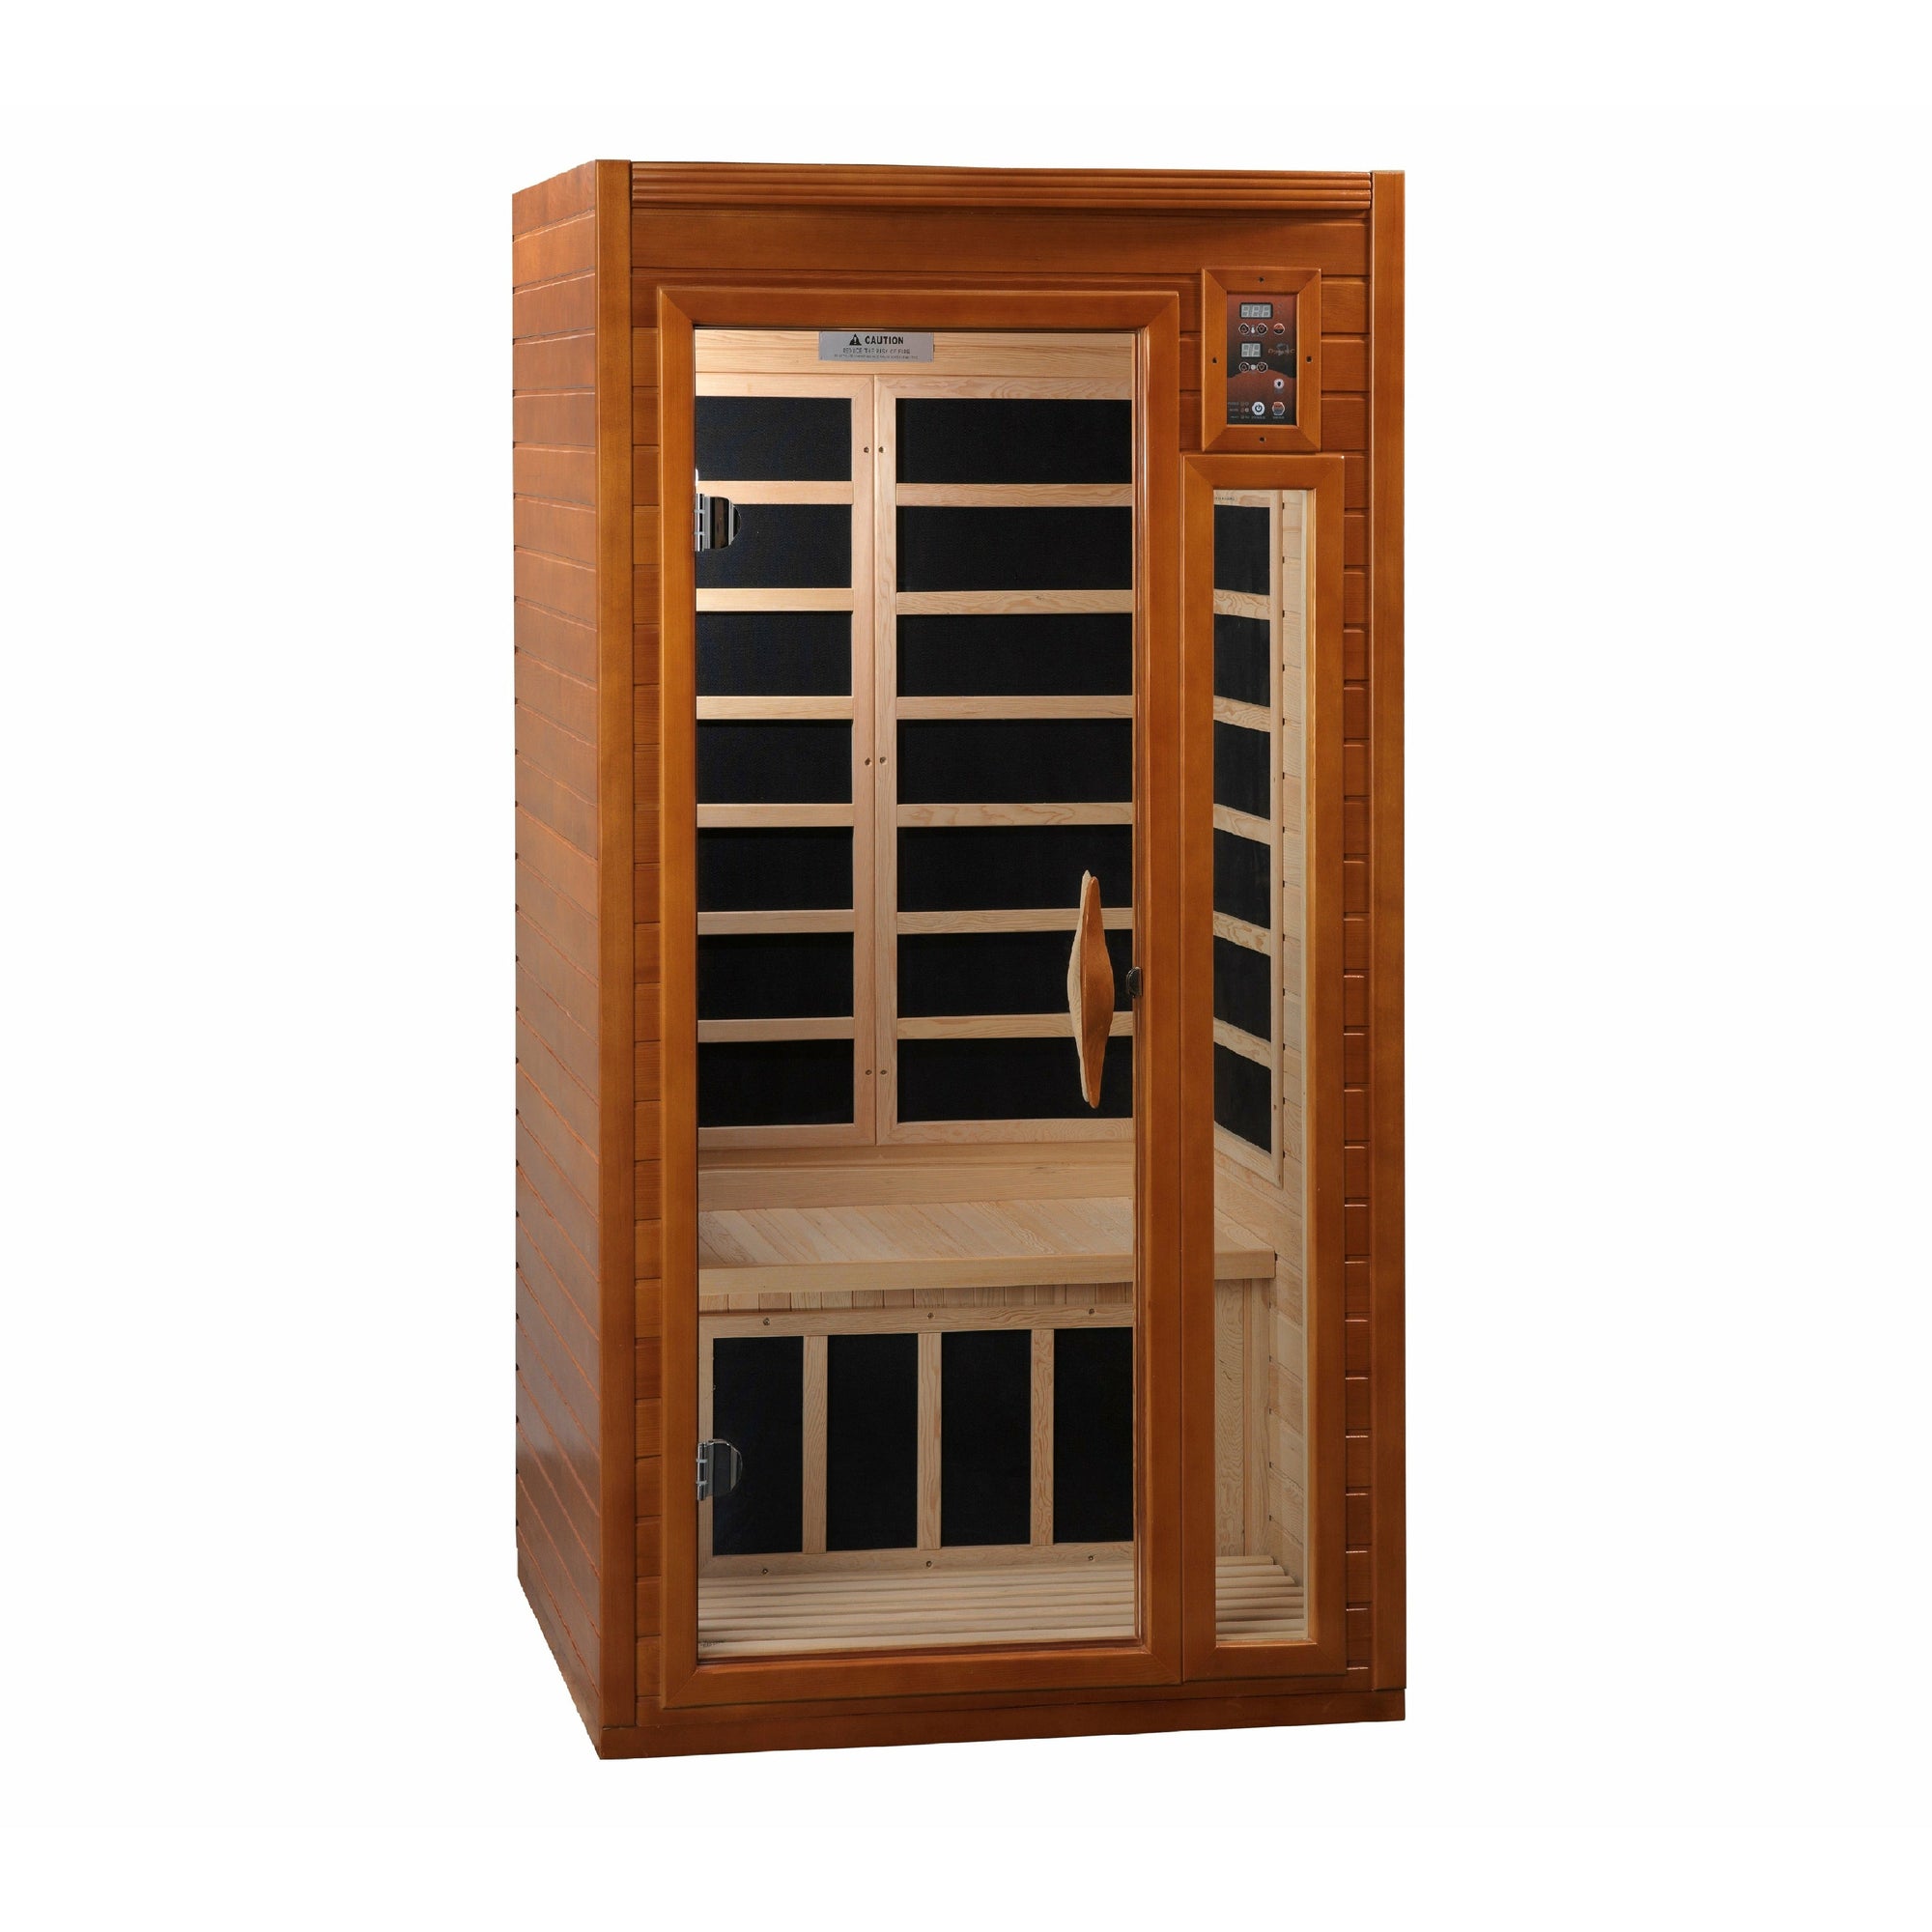 Dynamic Barcelona Natural hemlock wood construction Roof vent with tempered glass door-2 person isometrical view